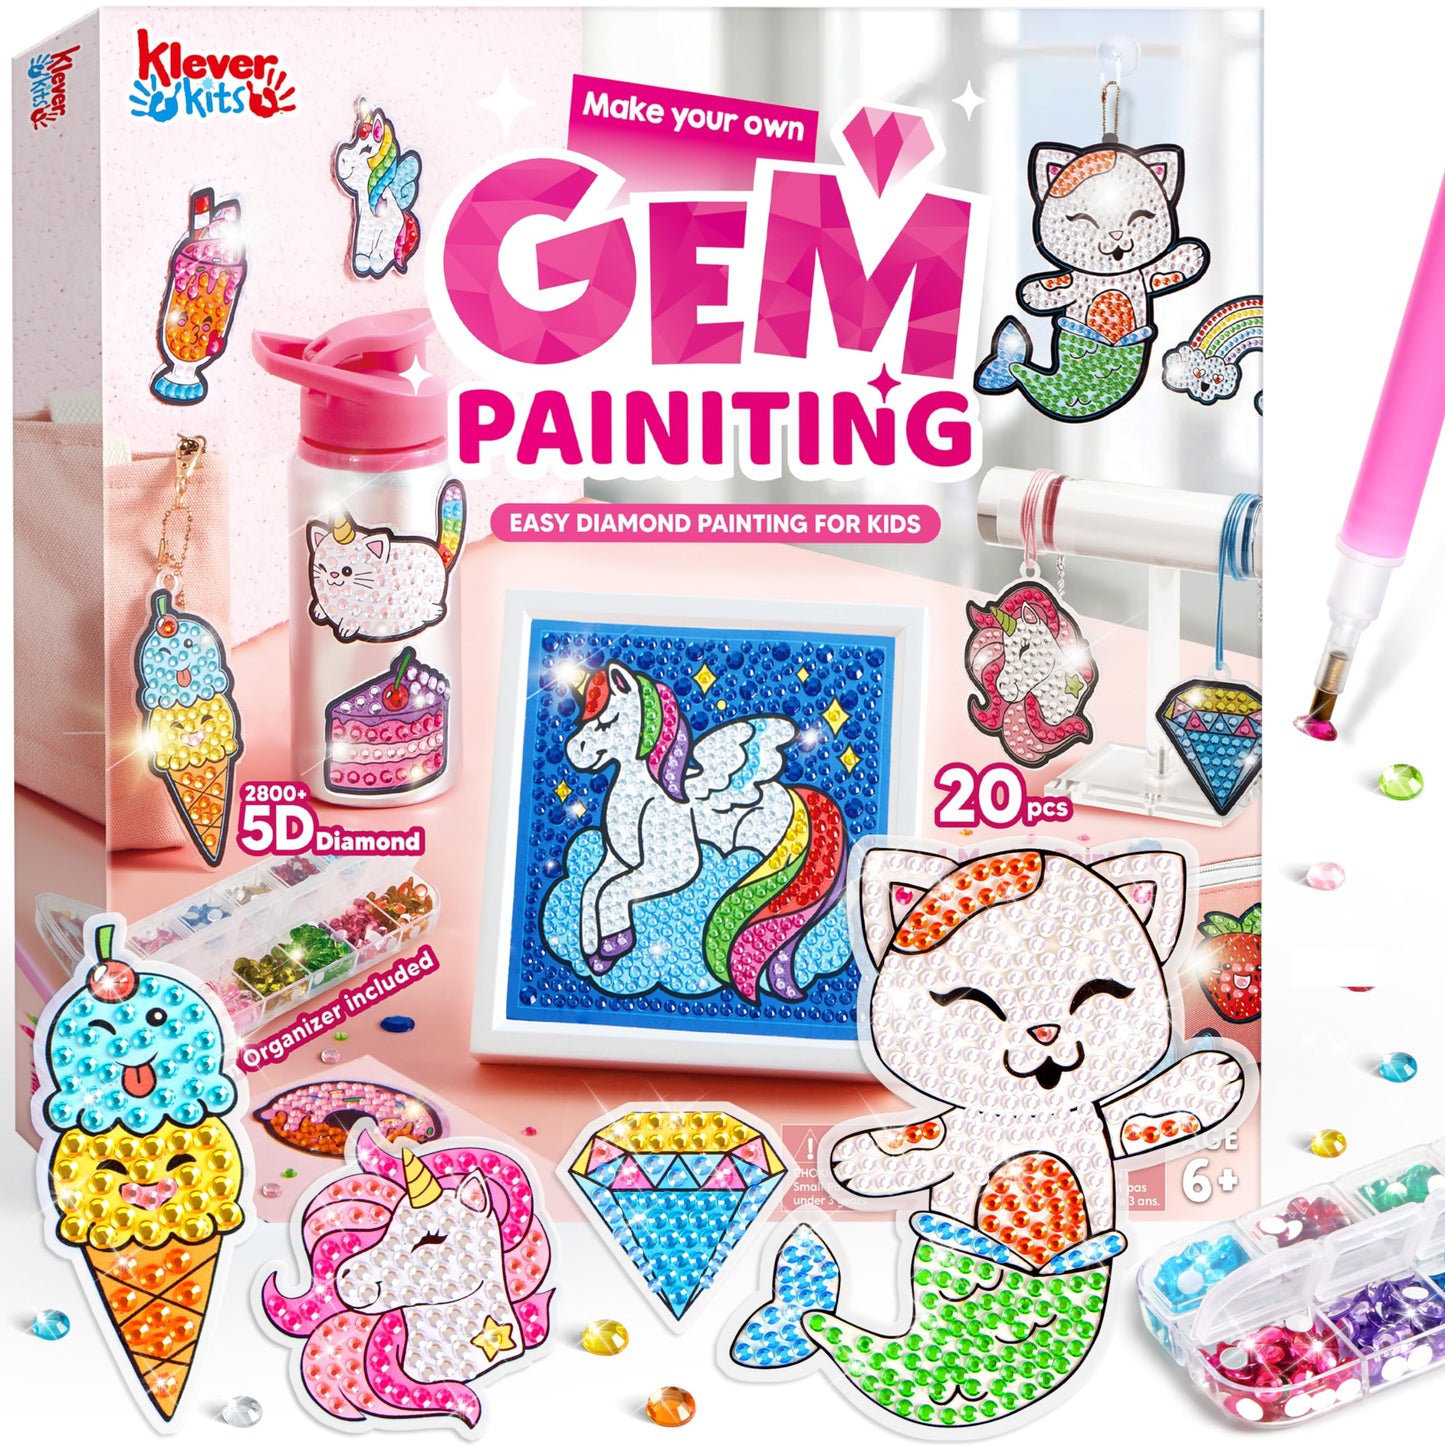 Gem Art, Kids Diamond Painting Kit with 5D Gem, Arts and Crafts for Girls Ages 6-12, Gem Craft Activities Kits, Premium Diamond Art Gift Ideas for